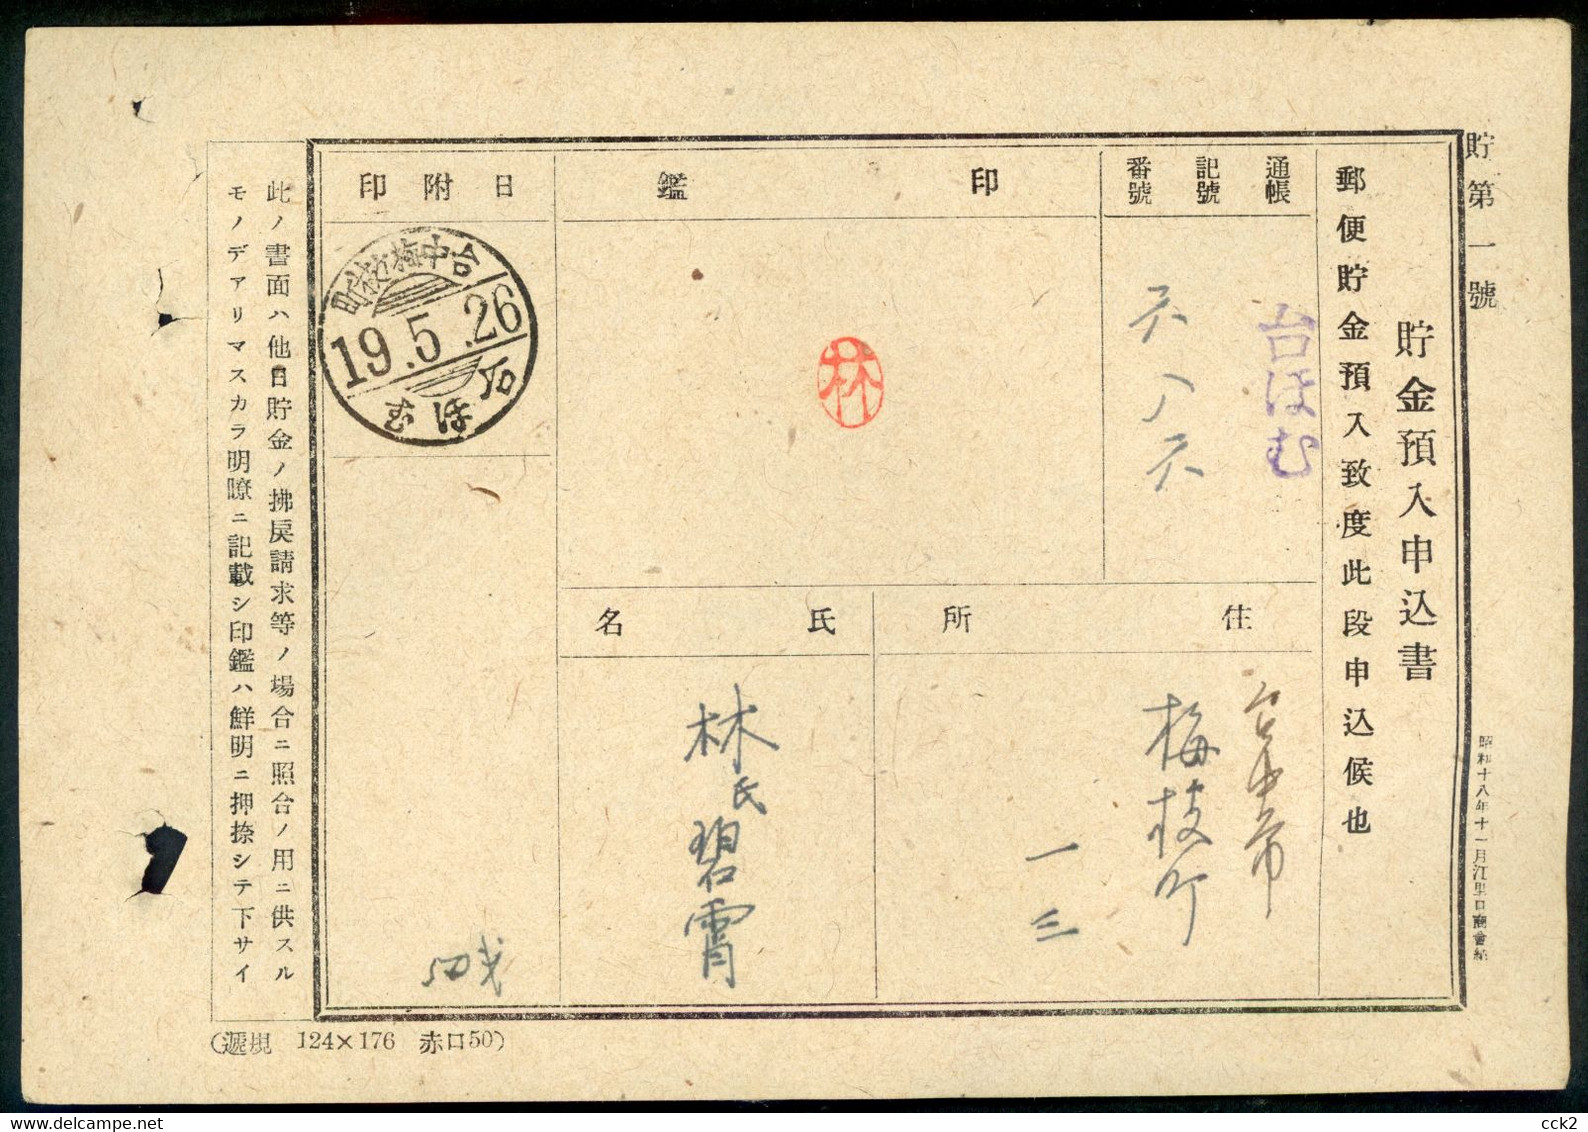 JAPAN OCCUPATION TAIWAN- Postal Convenience Savings Fund Advance Deposit Application Form (3) - 1945 Occupazione Giapponese